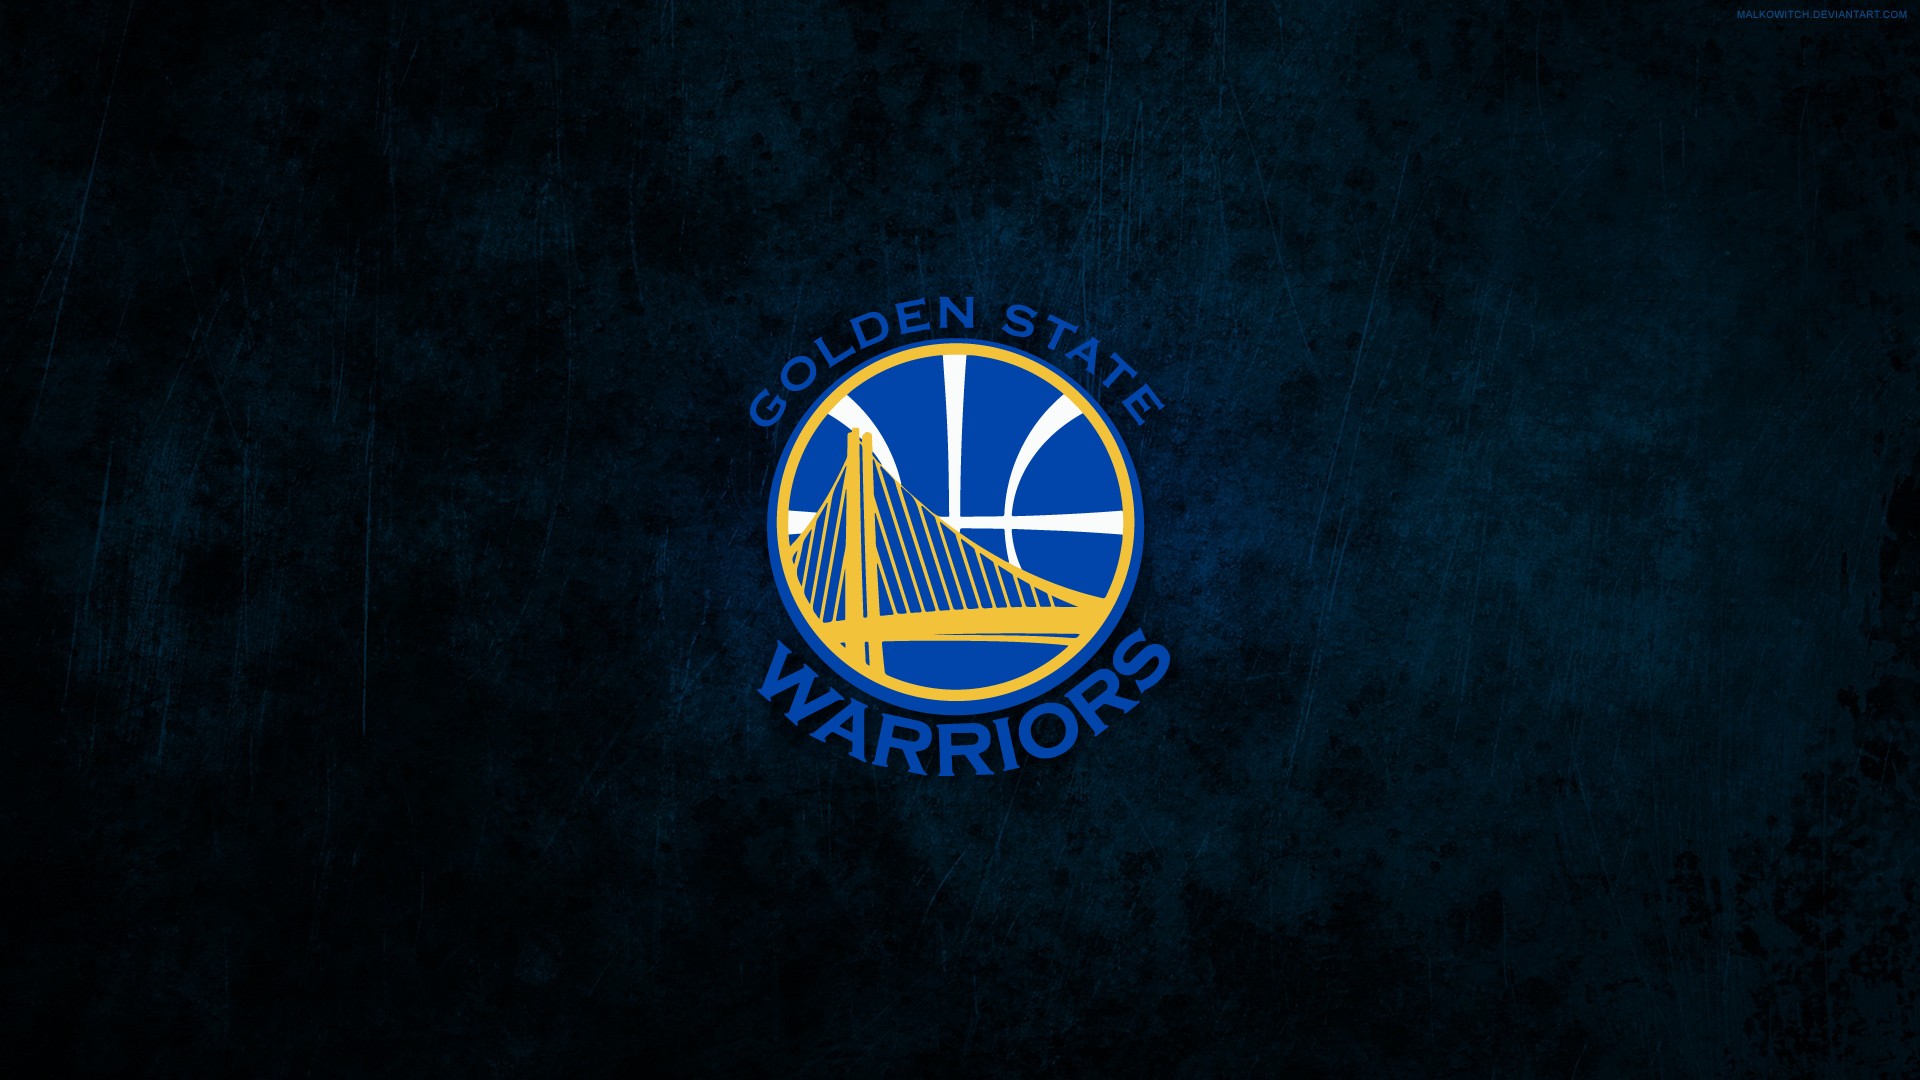 Golden State Basketball Wallpaper For Mac Backgrounds with high-resolution 1920x1080 pixel. You can use this wallpaper for your Desktop Computer Backgrounds, Windows or Mac Screensavers, iPhone Lock screen, Tablet or Android and another Mobile Phone device